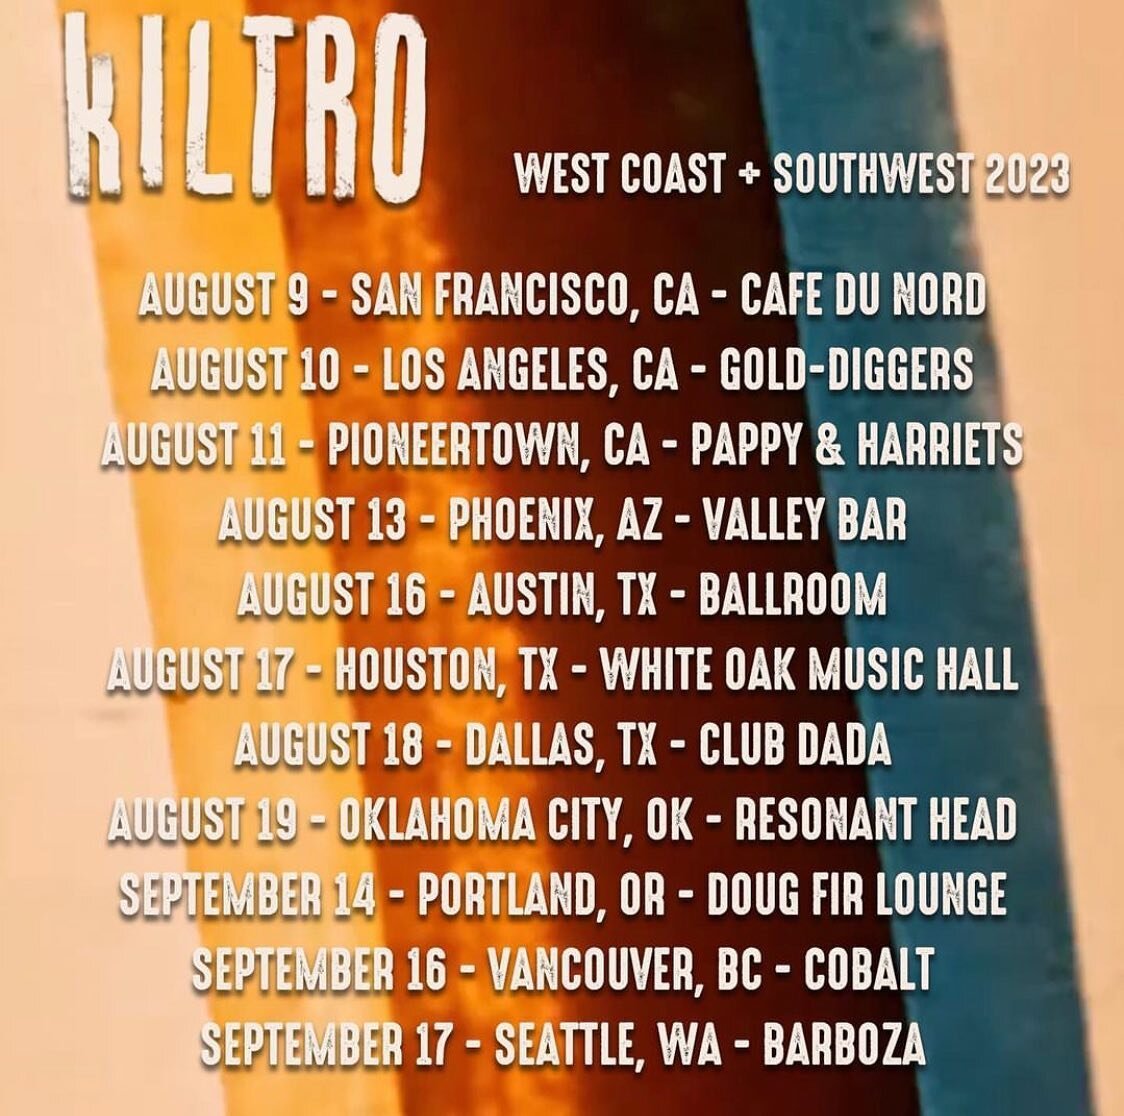 @kiltromusic extends their summer tour with a west coast leg in August and September.